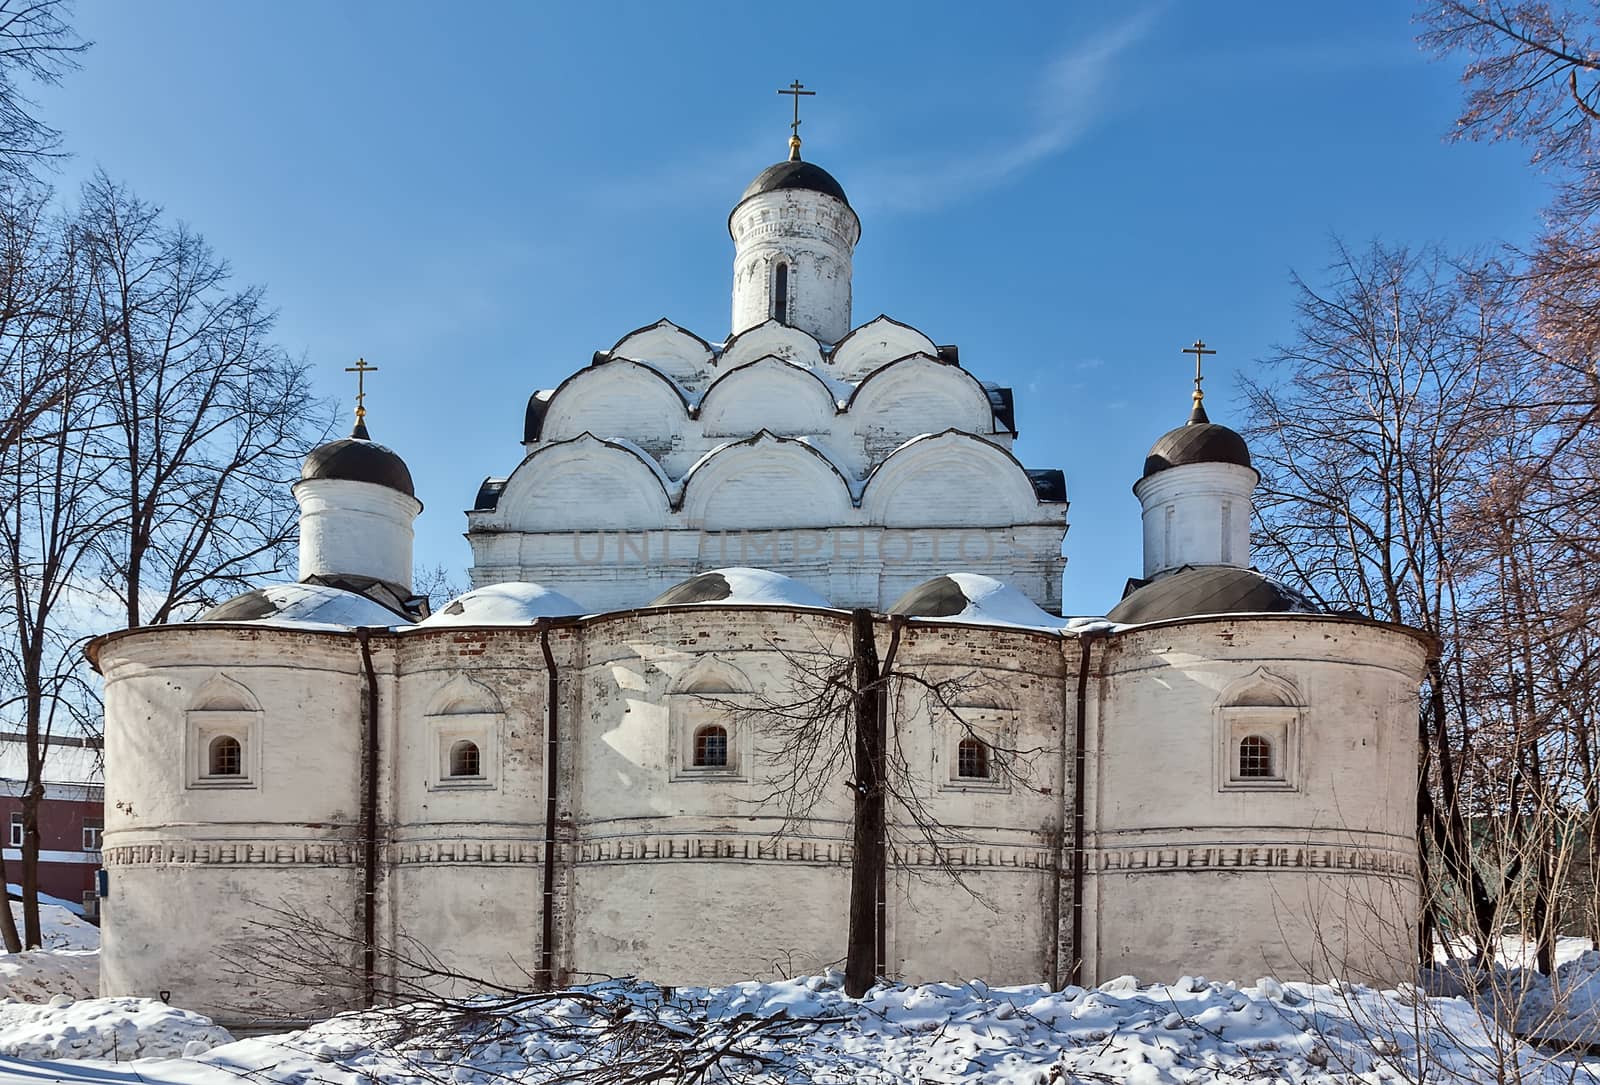 Church of the Protection of the Theotokos in Rubtsovo (Moscow). Built in 1619-1627.